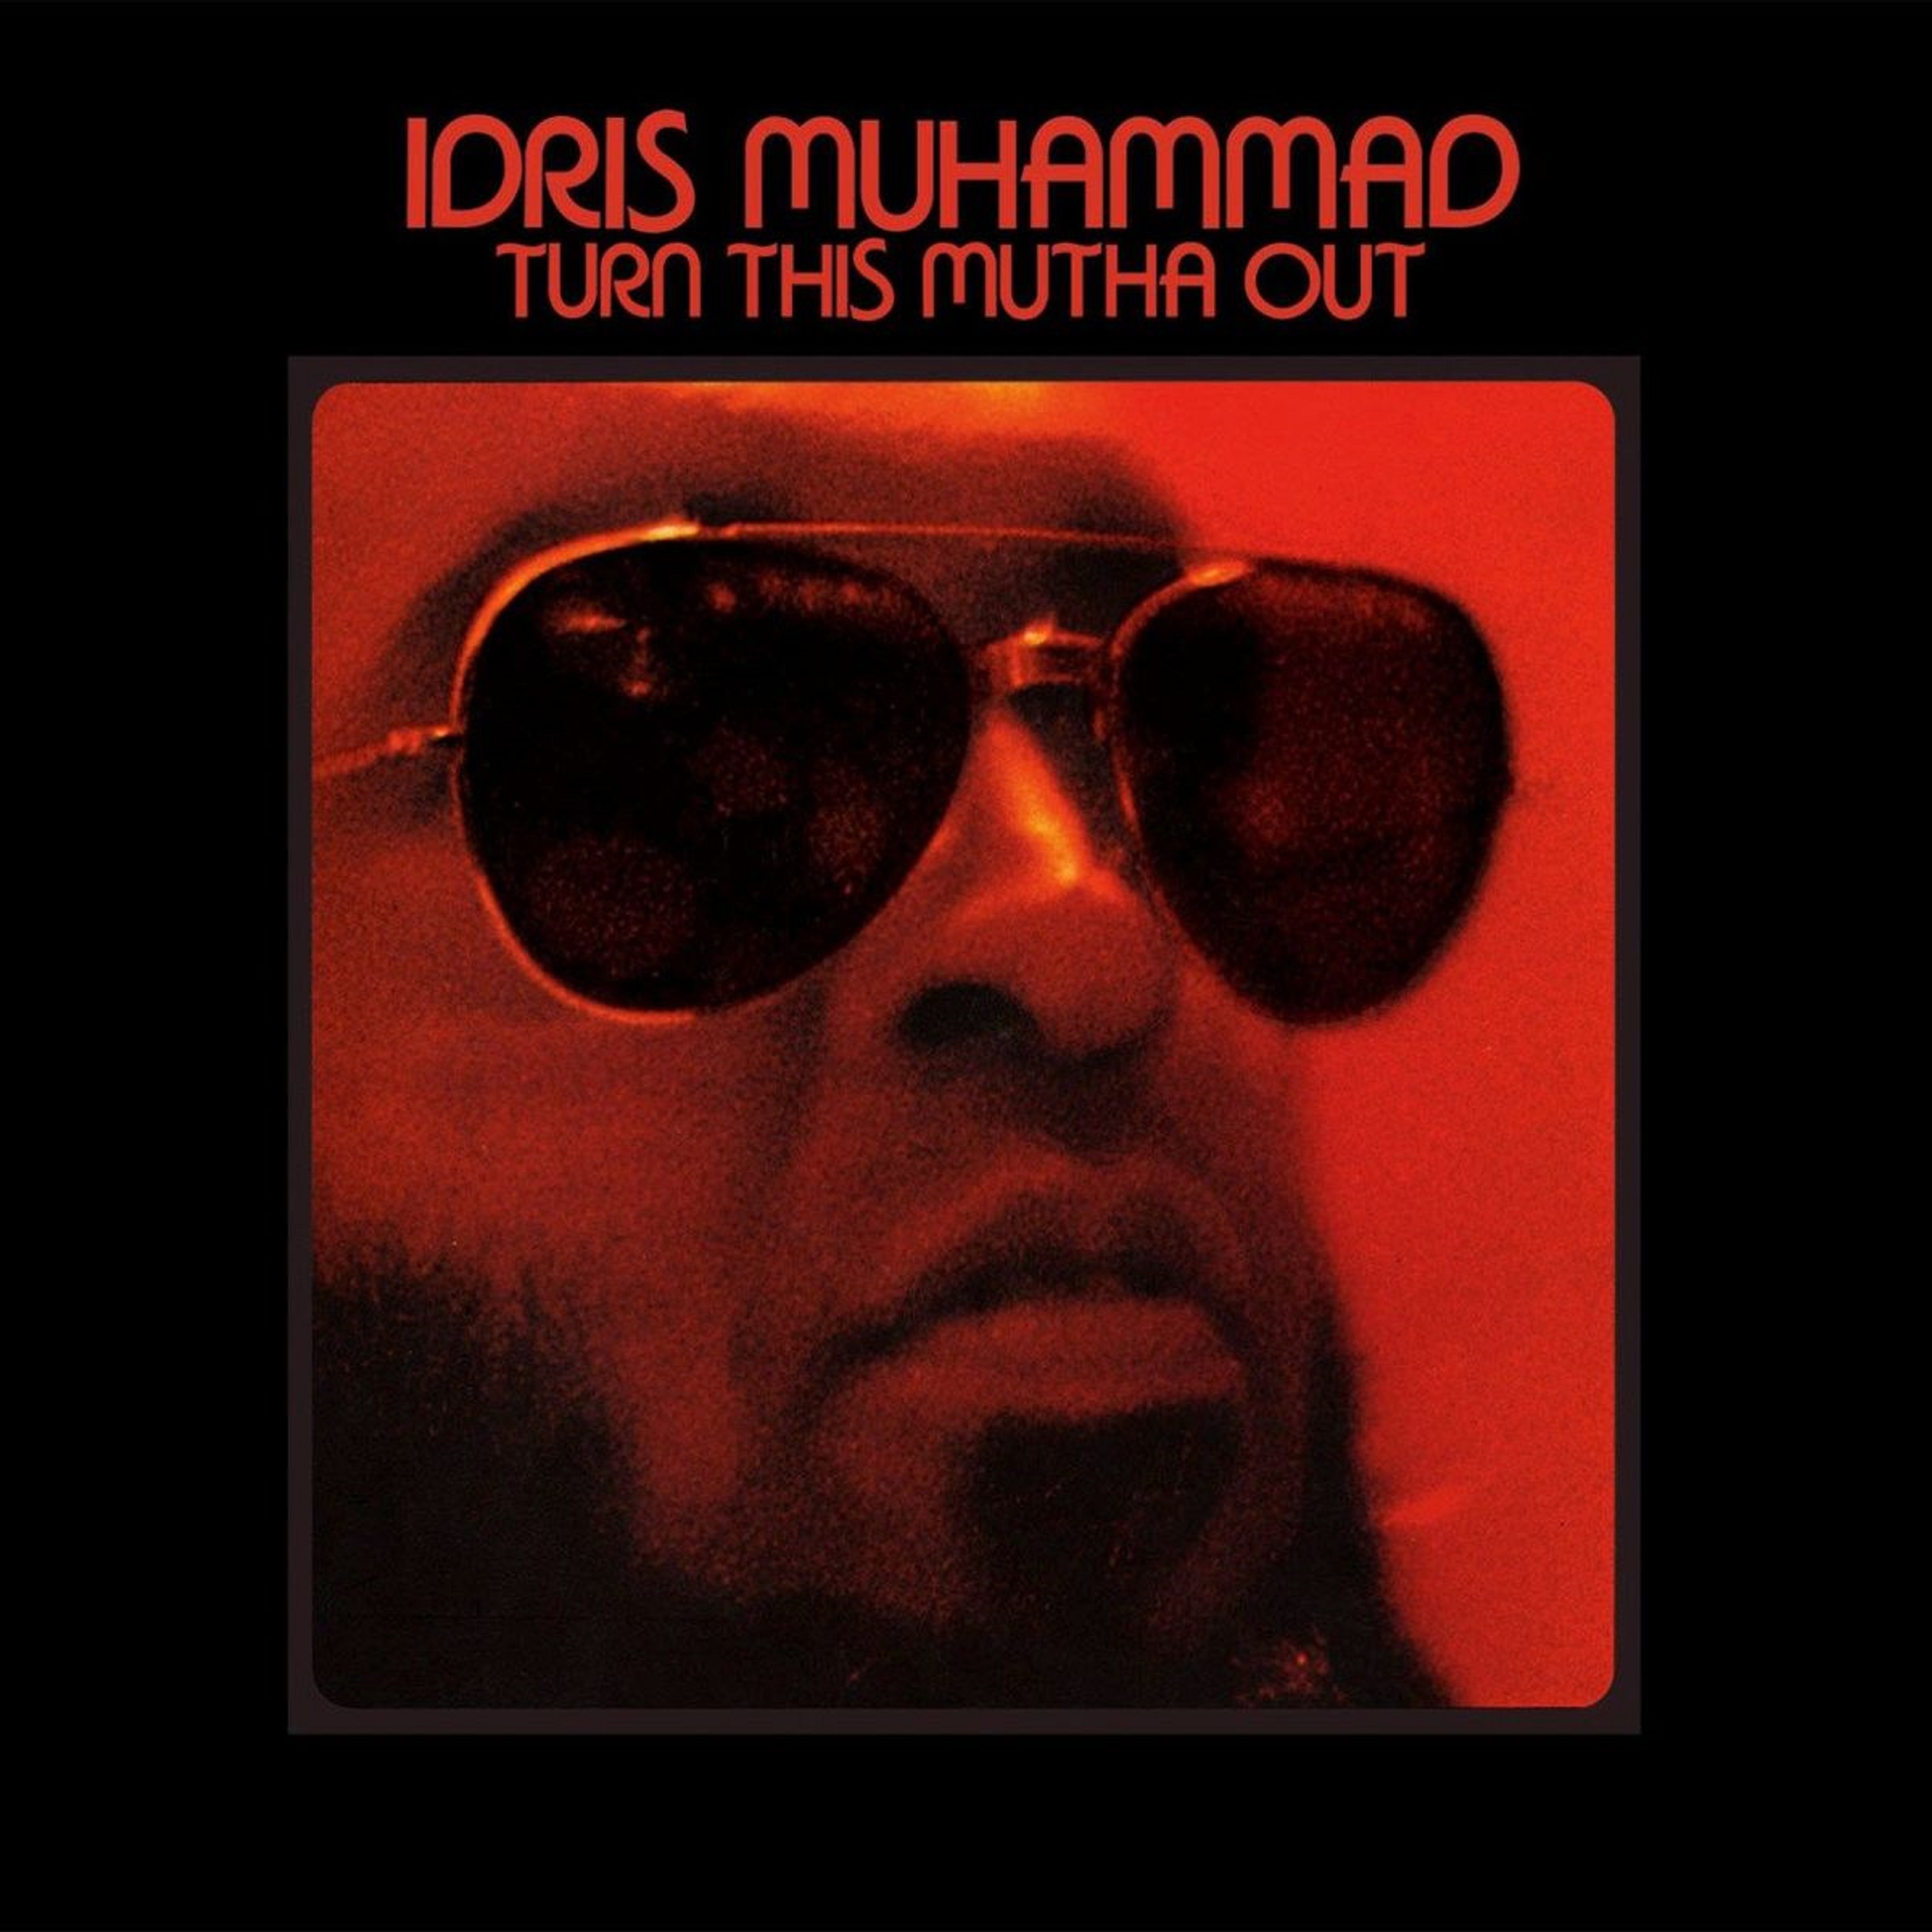 Idris Muhammad/TURN THIS MUTHA OUT LP